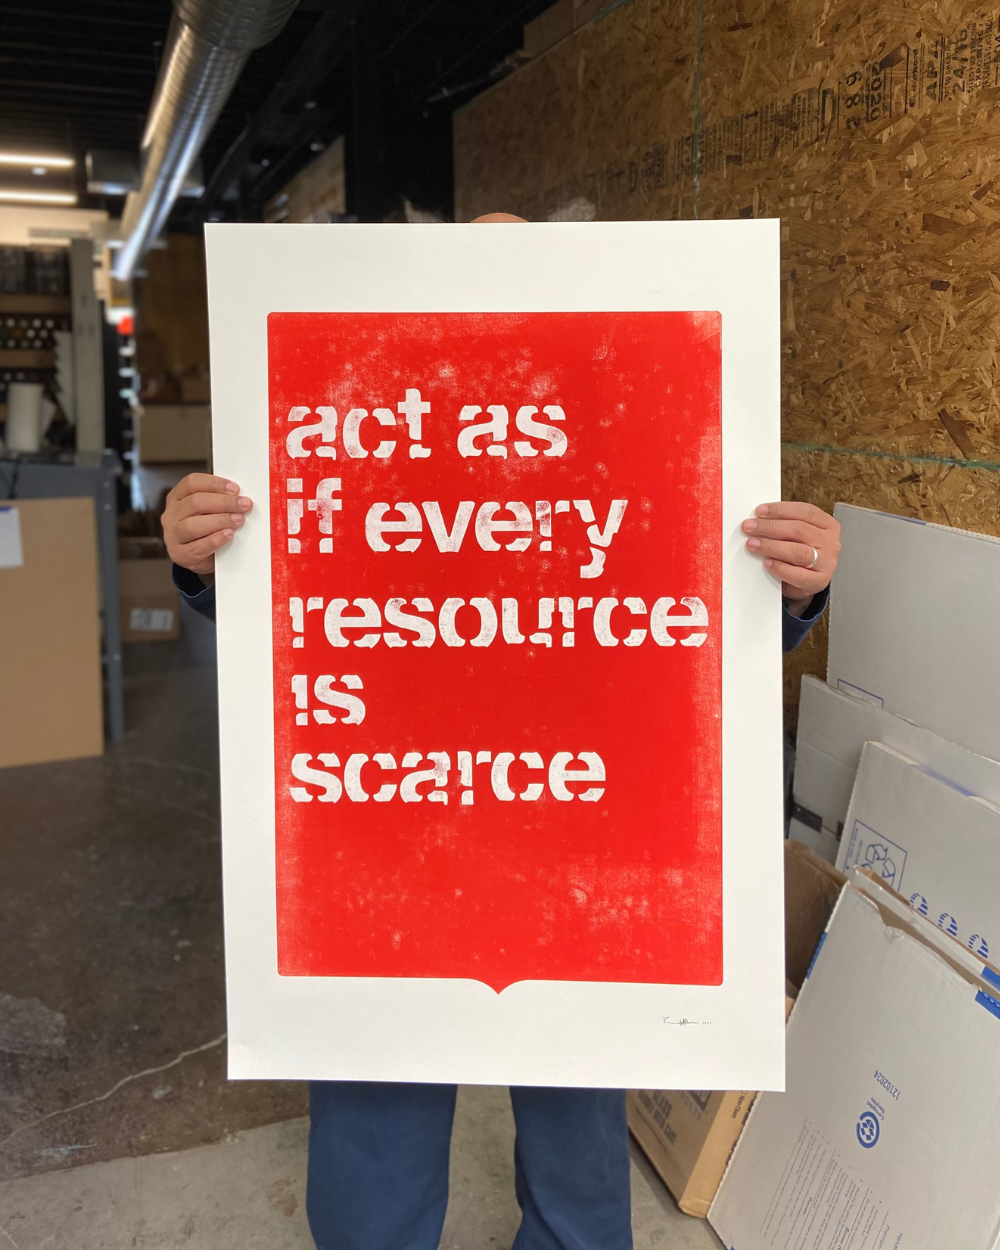 Photo courtesy of Rick Griffith. [Image description: a person holding a large print that covers their face, torso, and thighs. The poster is red with a white border, there’s white text on it that reads “act as if every resource is scarce” in all lower case letters. Pieces of the lettering look cut off. The image is captured in what looks like a warehouse or studio.]